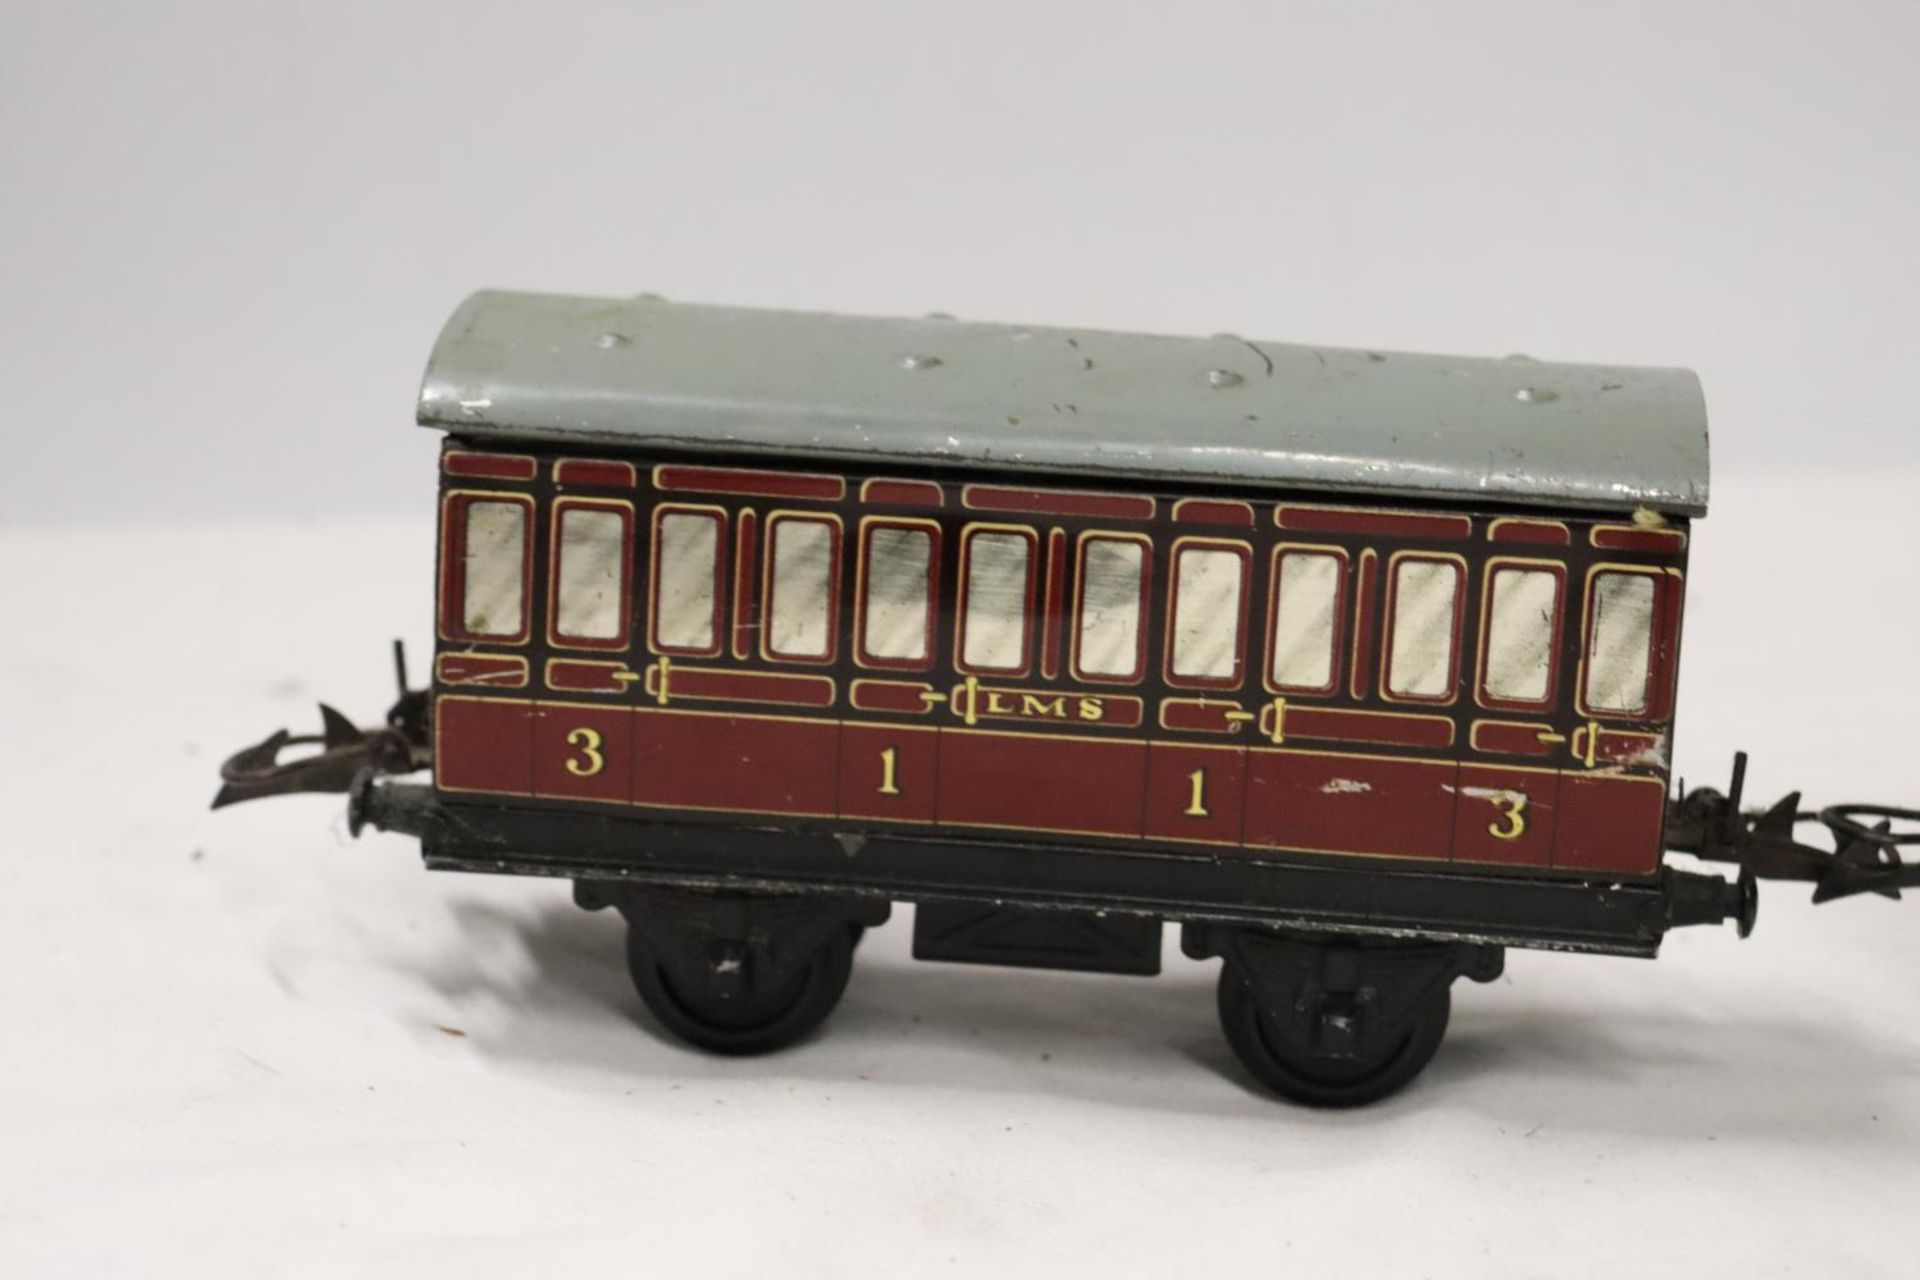 TWO HORNBY .30 GAUGE METAL RAILWAY CARRIAGES LENGTH 17 CM - Image 2 of 7